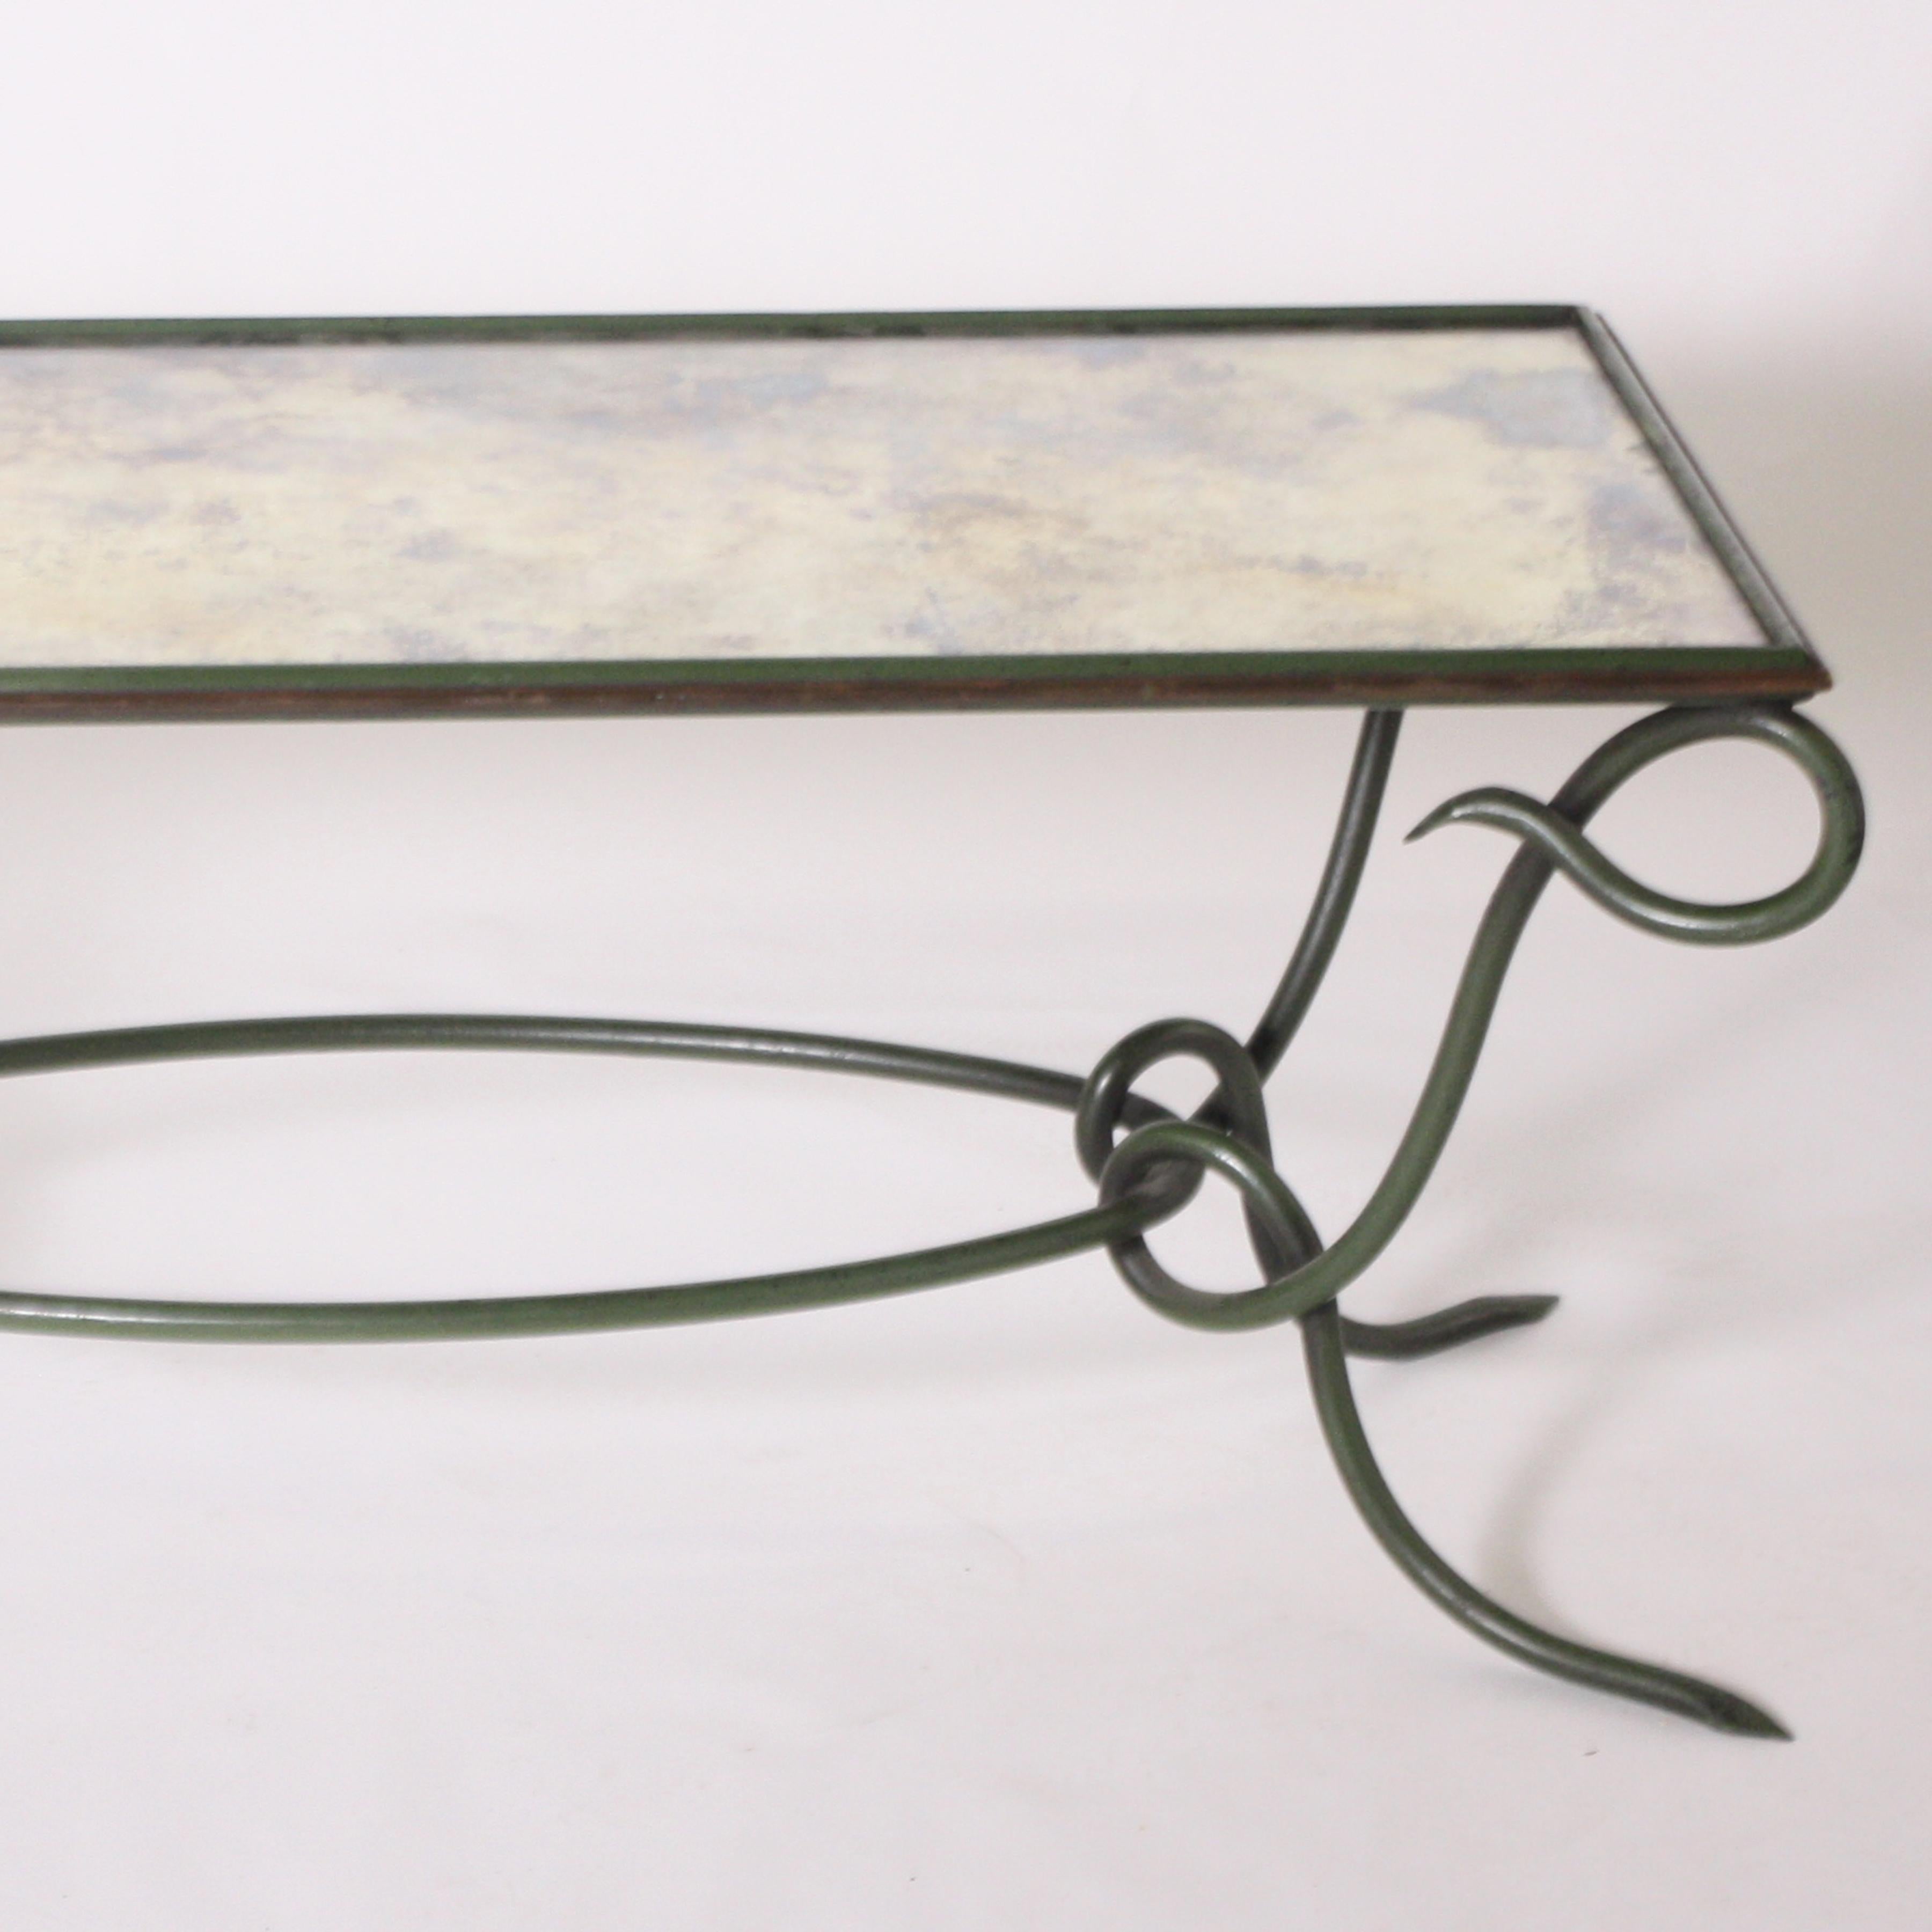 Rene Prou Green Metal Coffee Table with Antique Mirror, circa 1950 In Good Condition For Sale In Dallas, TX